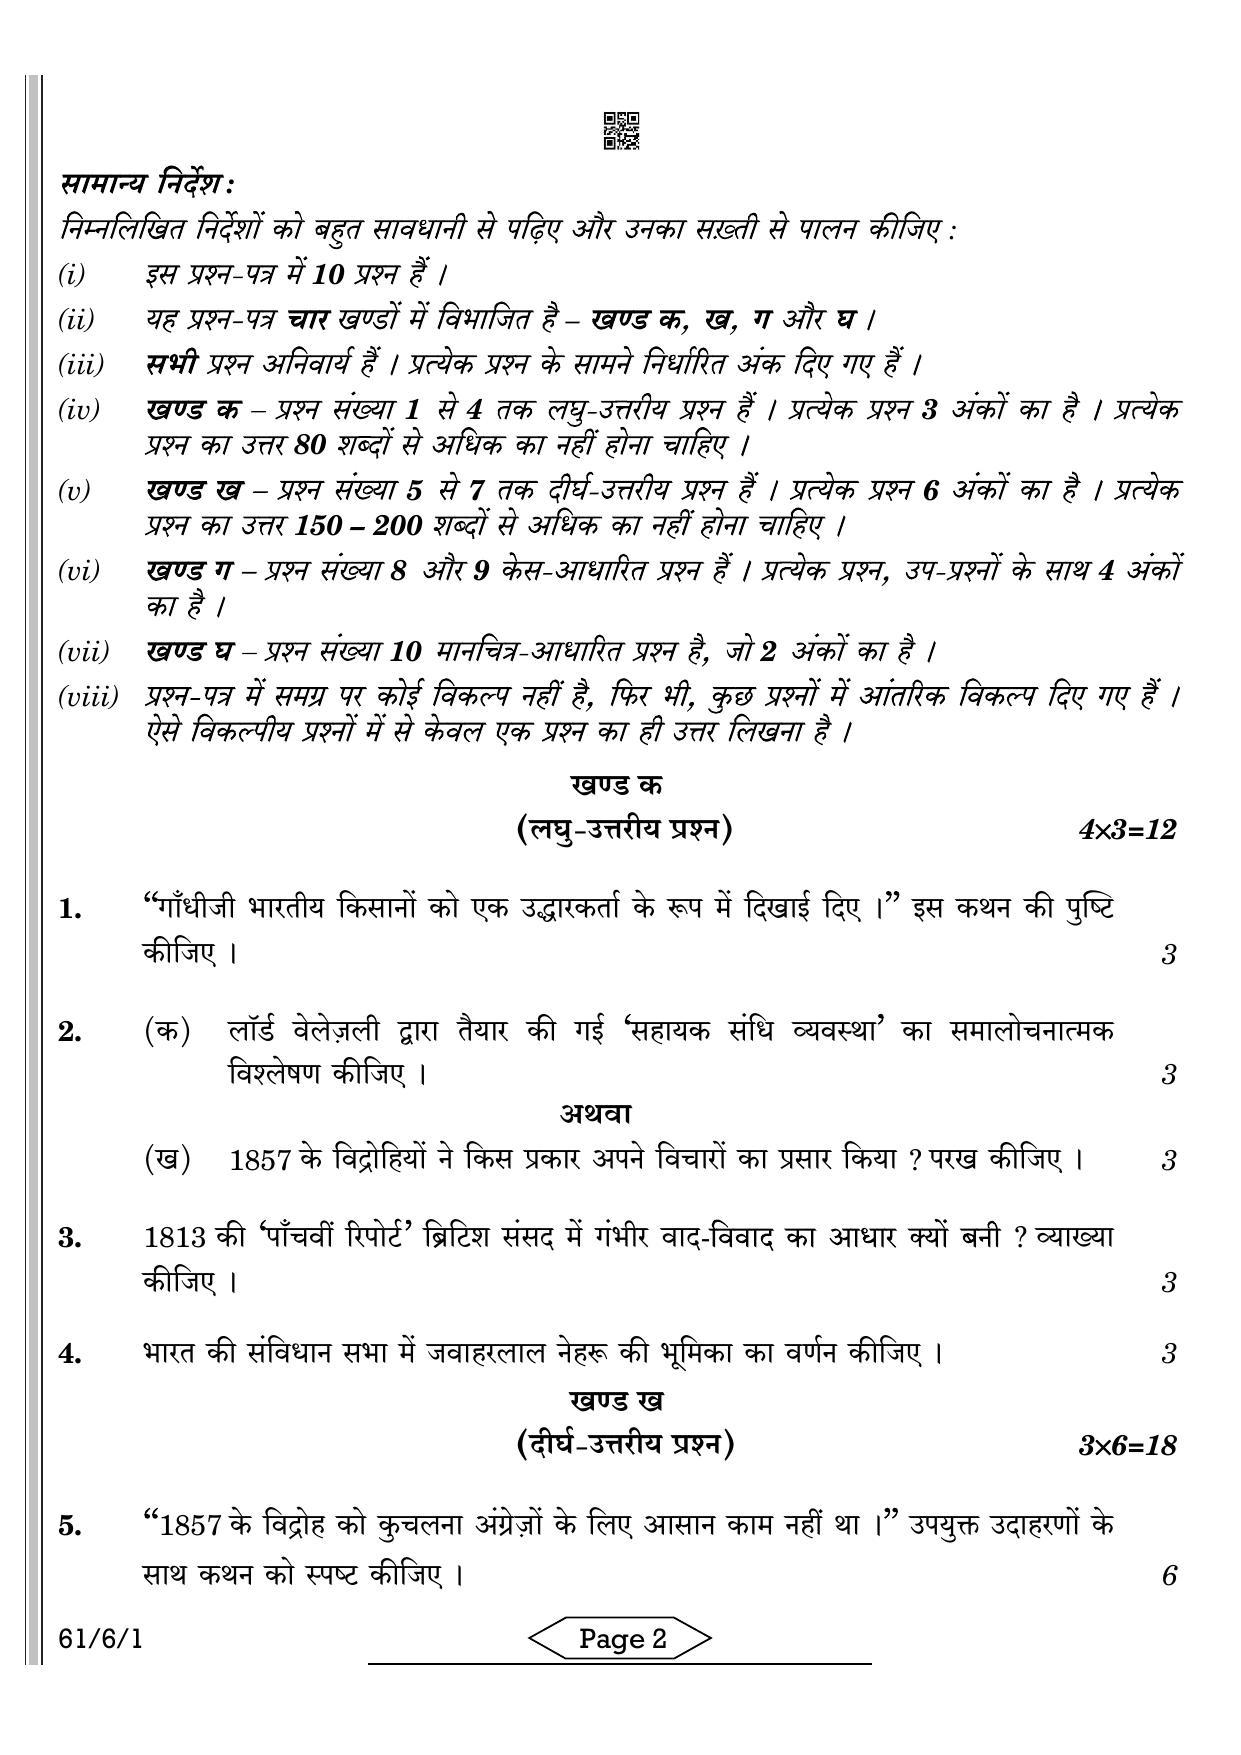 CBSE Class 12 61-6-1 HISTORY 2022 Compartment Question Paper - Page 2